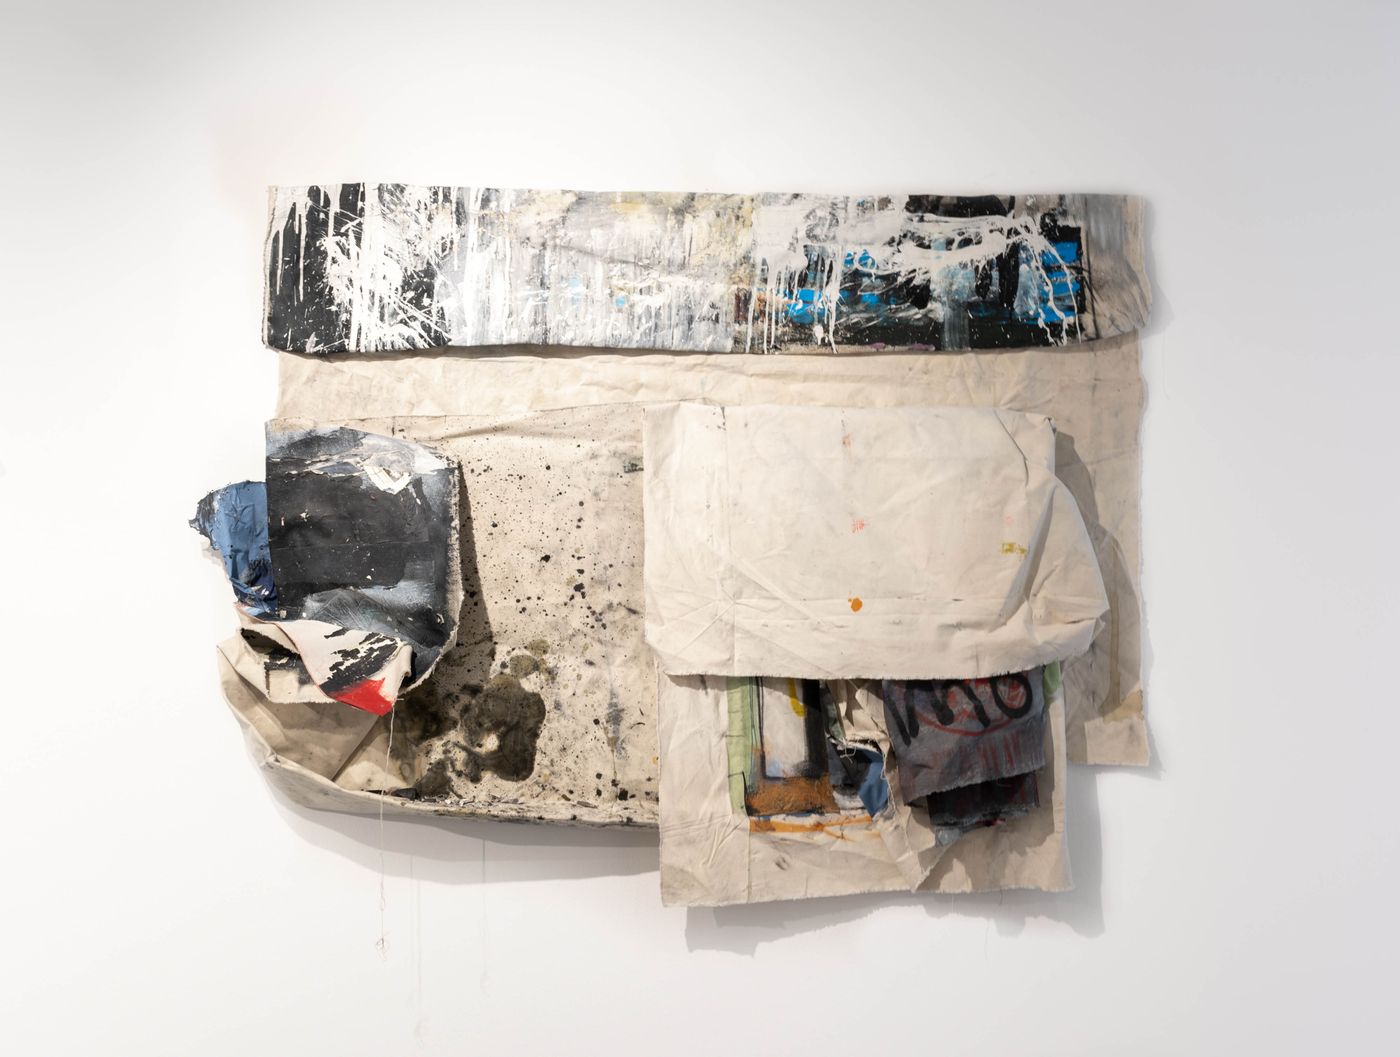 Ground Up, 2022. Spray paint, saliva, iodine, charcoal, acrylic, oil, oil pastel, pressure, staples, graphite, water, graphite, studio residue, canvas on drywall; 63 x 41 in. Photo: Allison Minto.